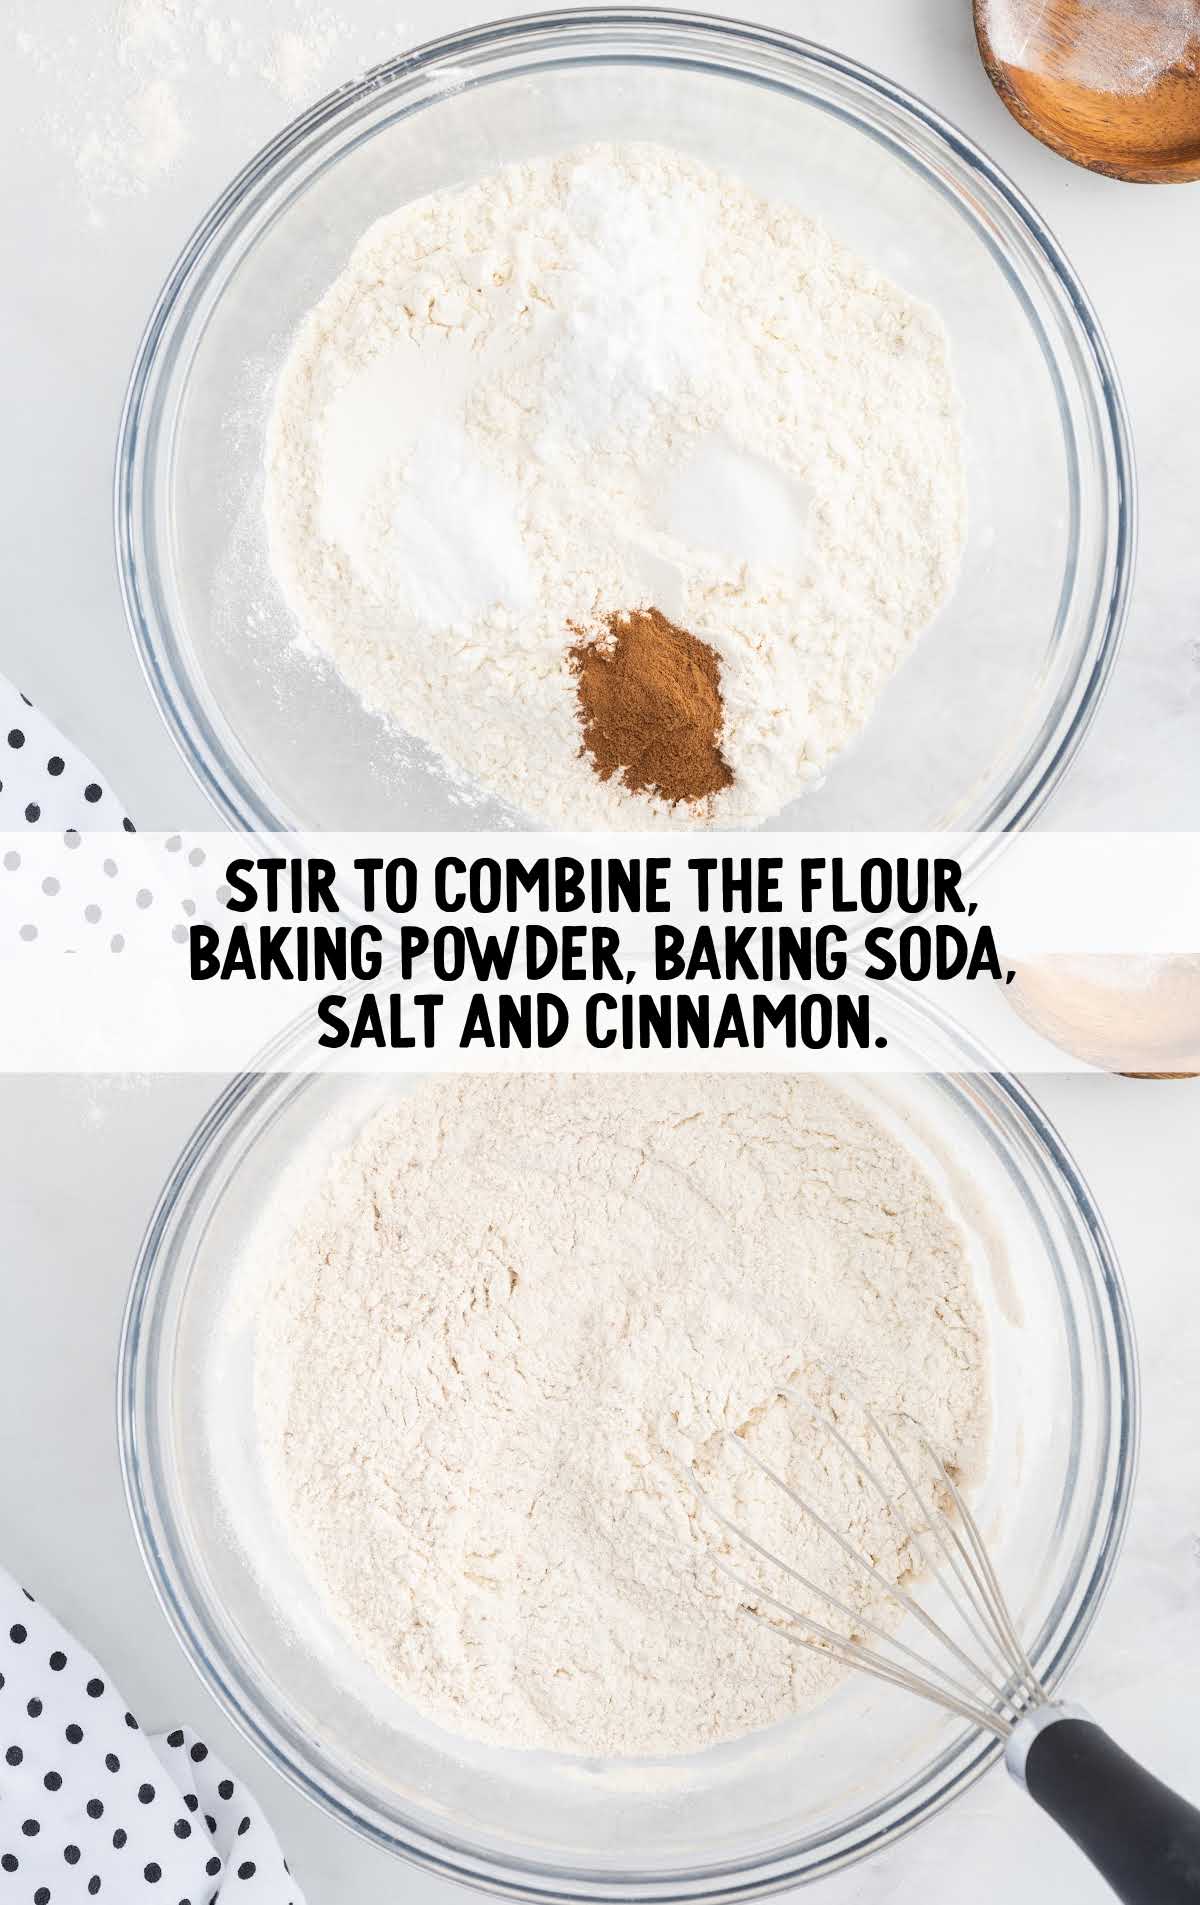 flour, baking powder, baking soda, salt and cinnamon in a bowl and then whisked together in a bowl